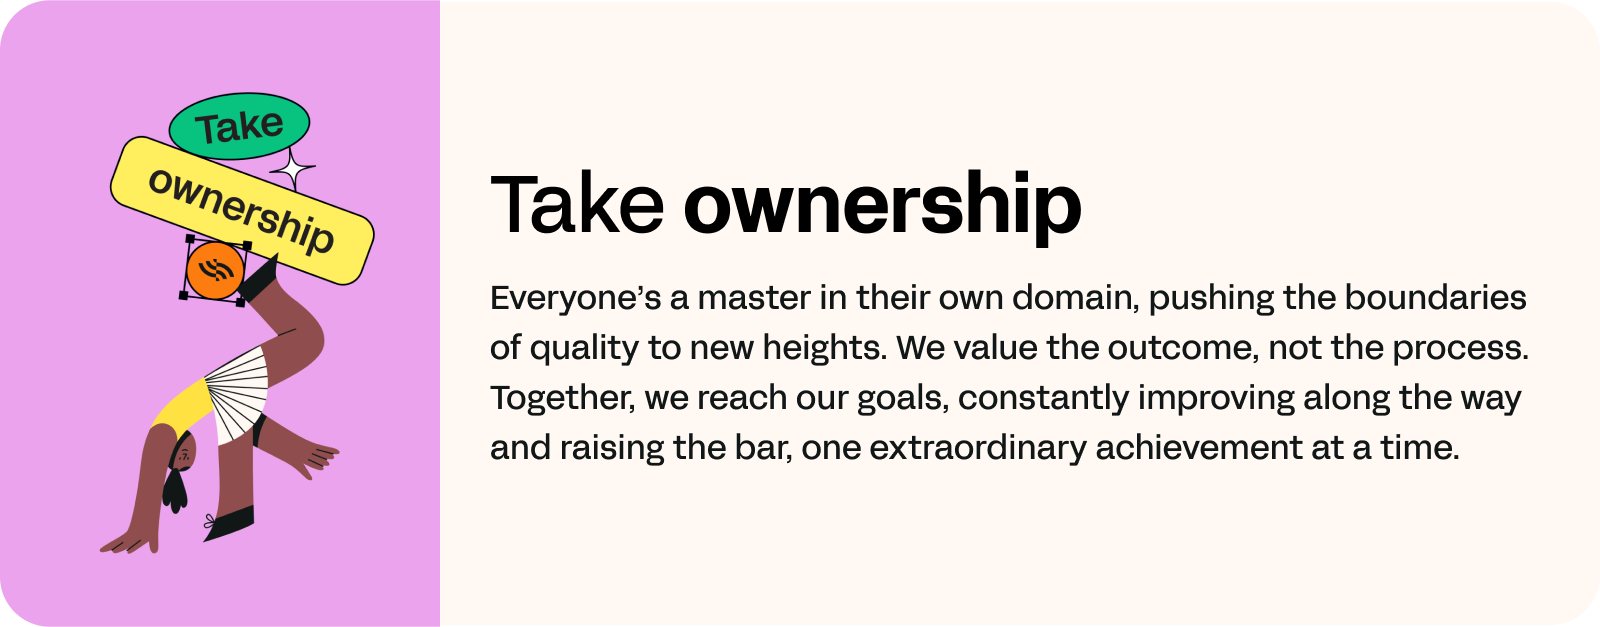 Linearity company values: take ownership